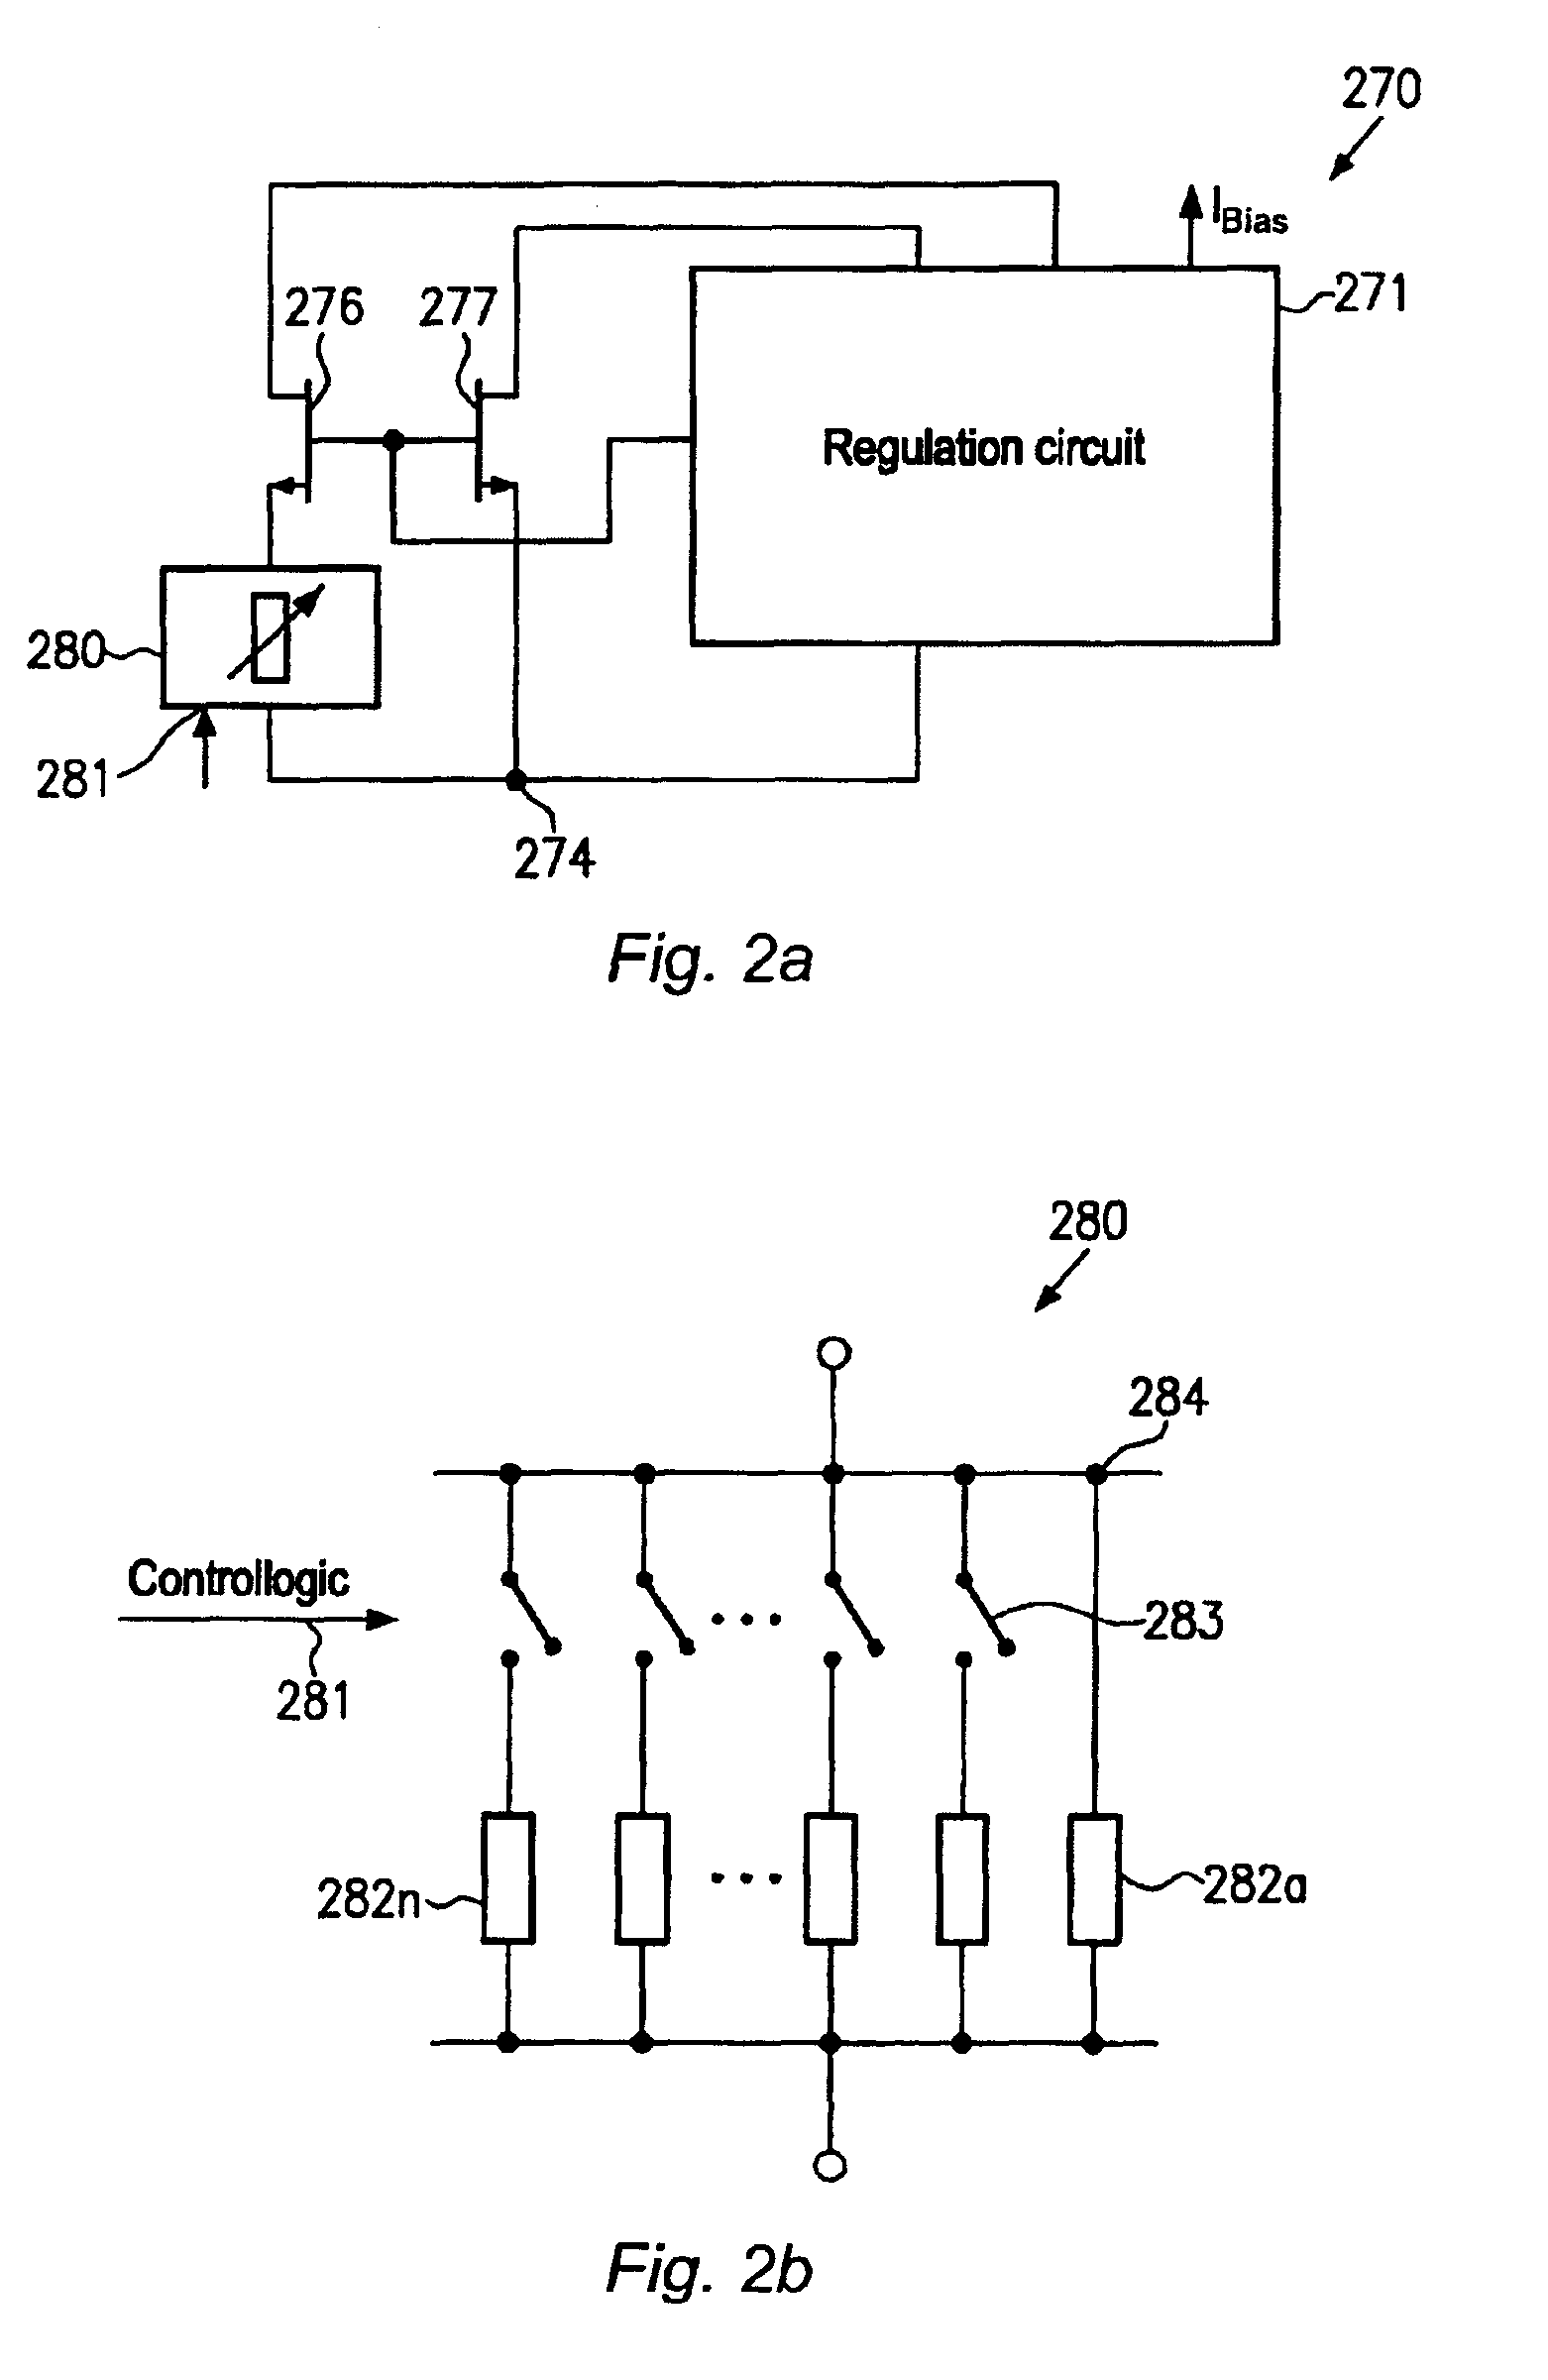 Circuit and a method for controlling the bias current in a switched capacitor circuit